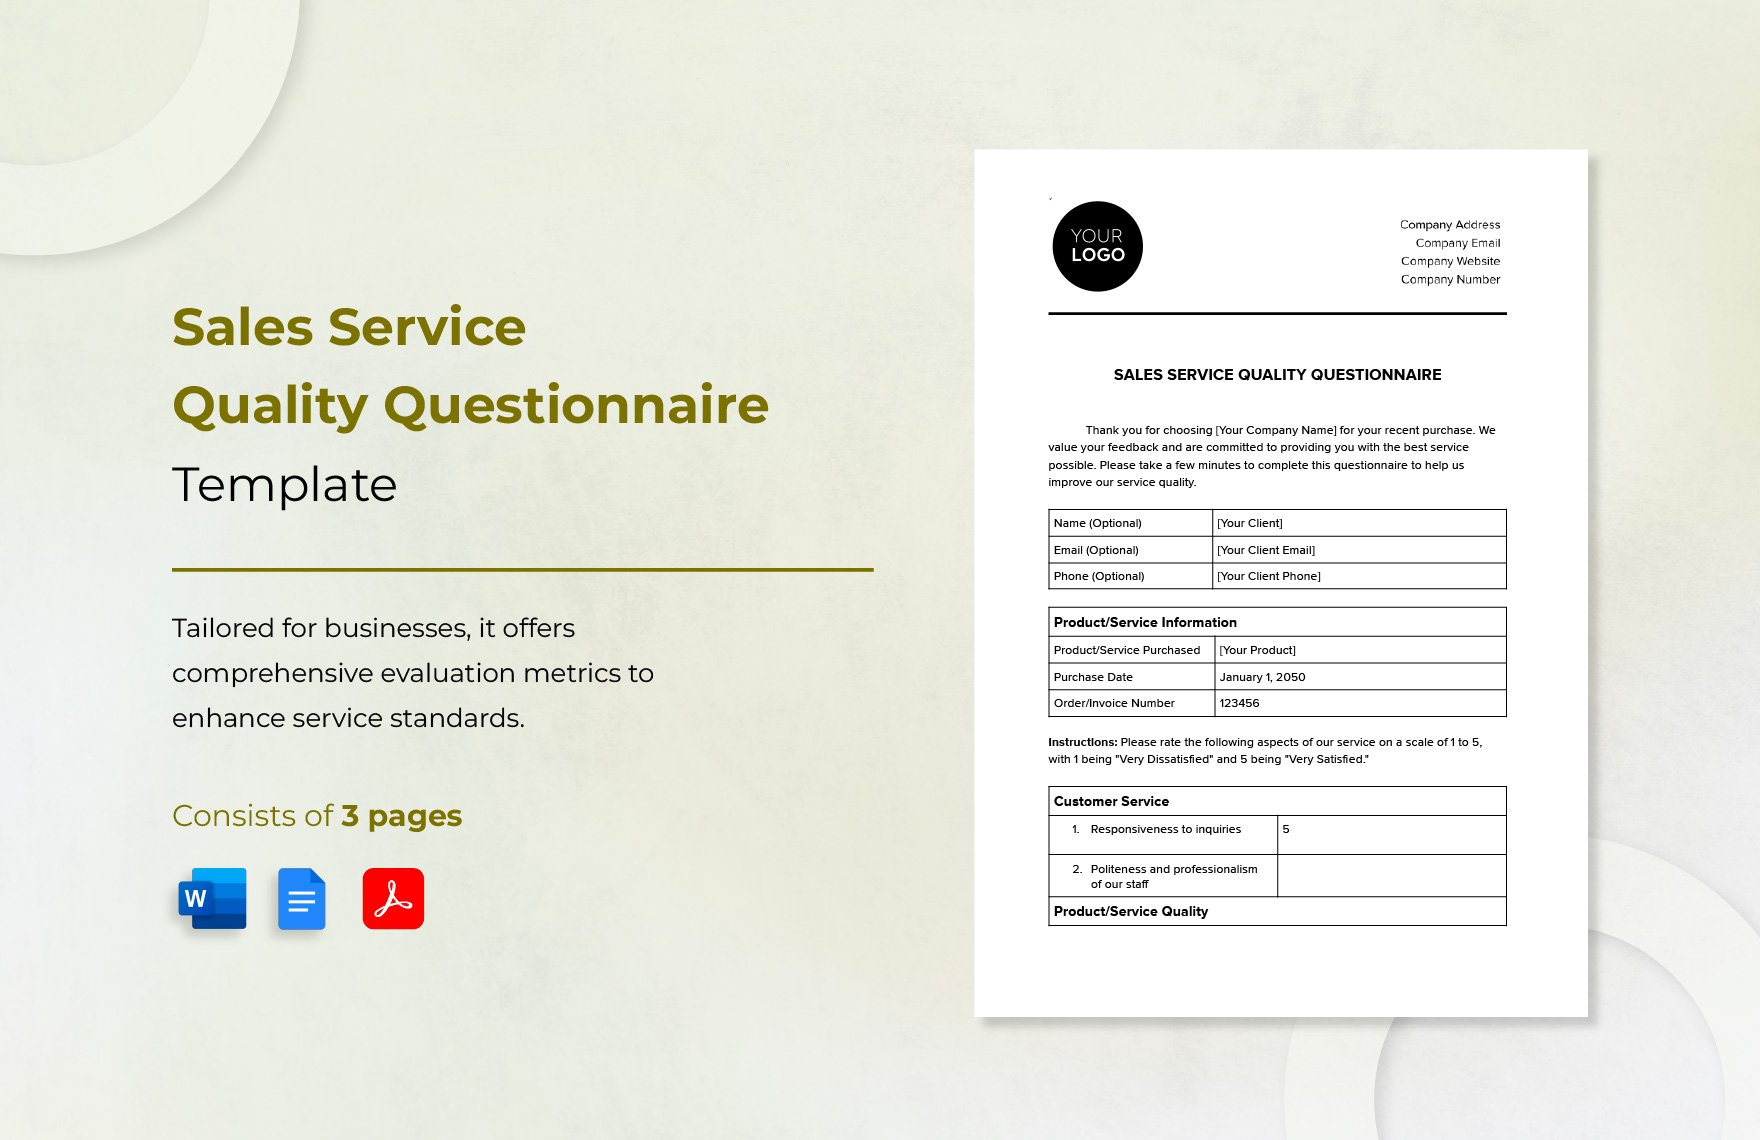 Sales Service Quality Questionnaire Template in Word, Google Docs, PDF